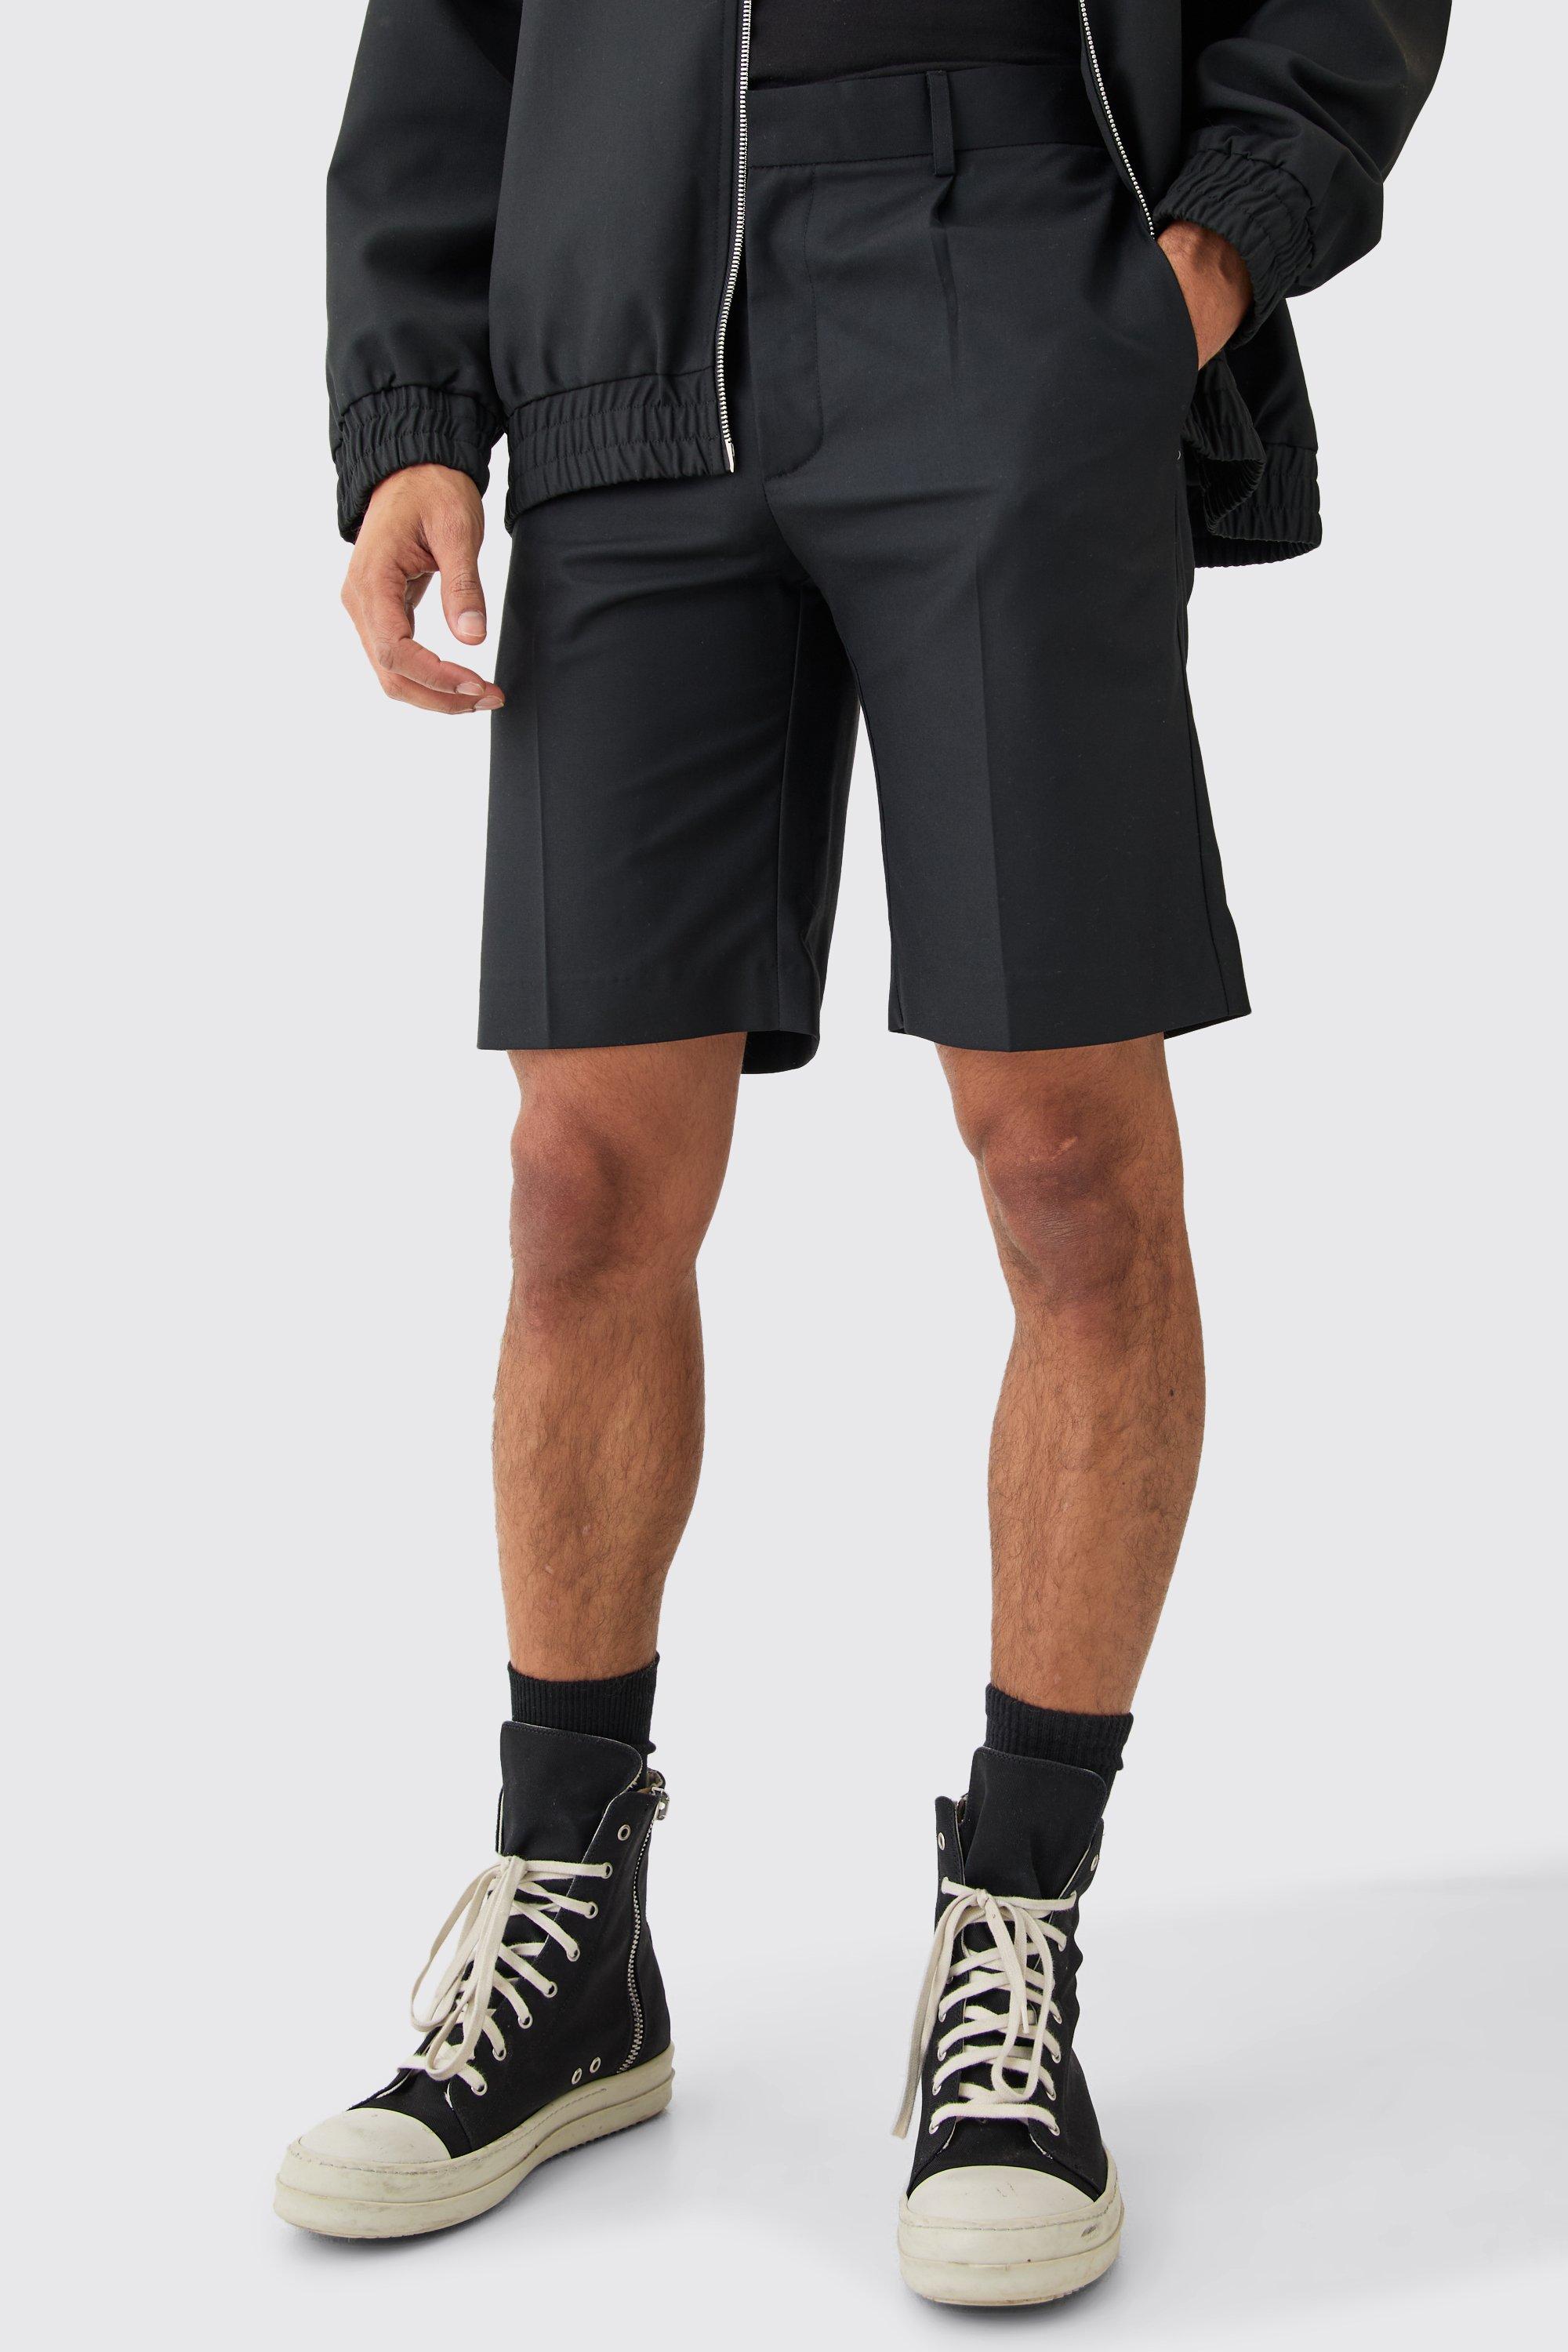 Mens Black Relaxed Fit Tailored Shorts, Black